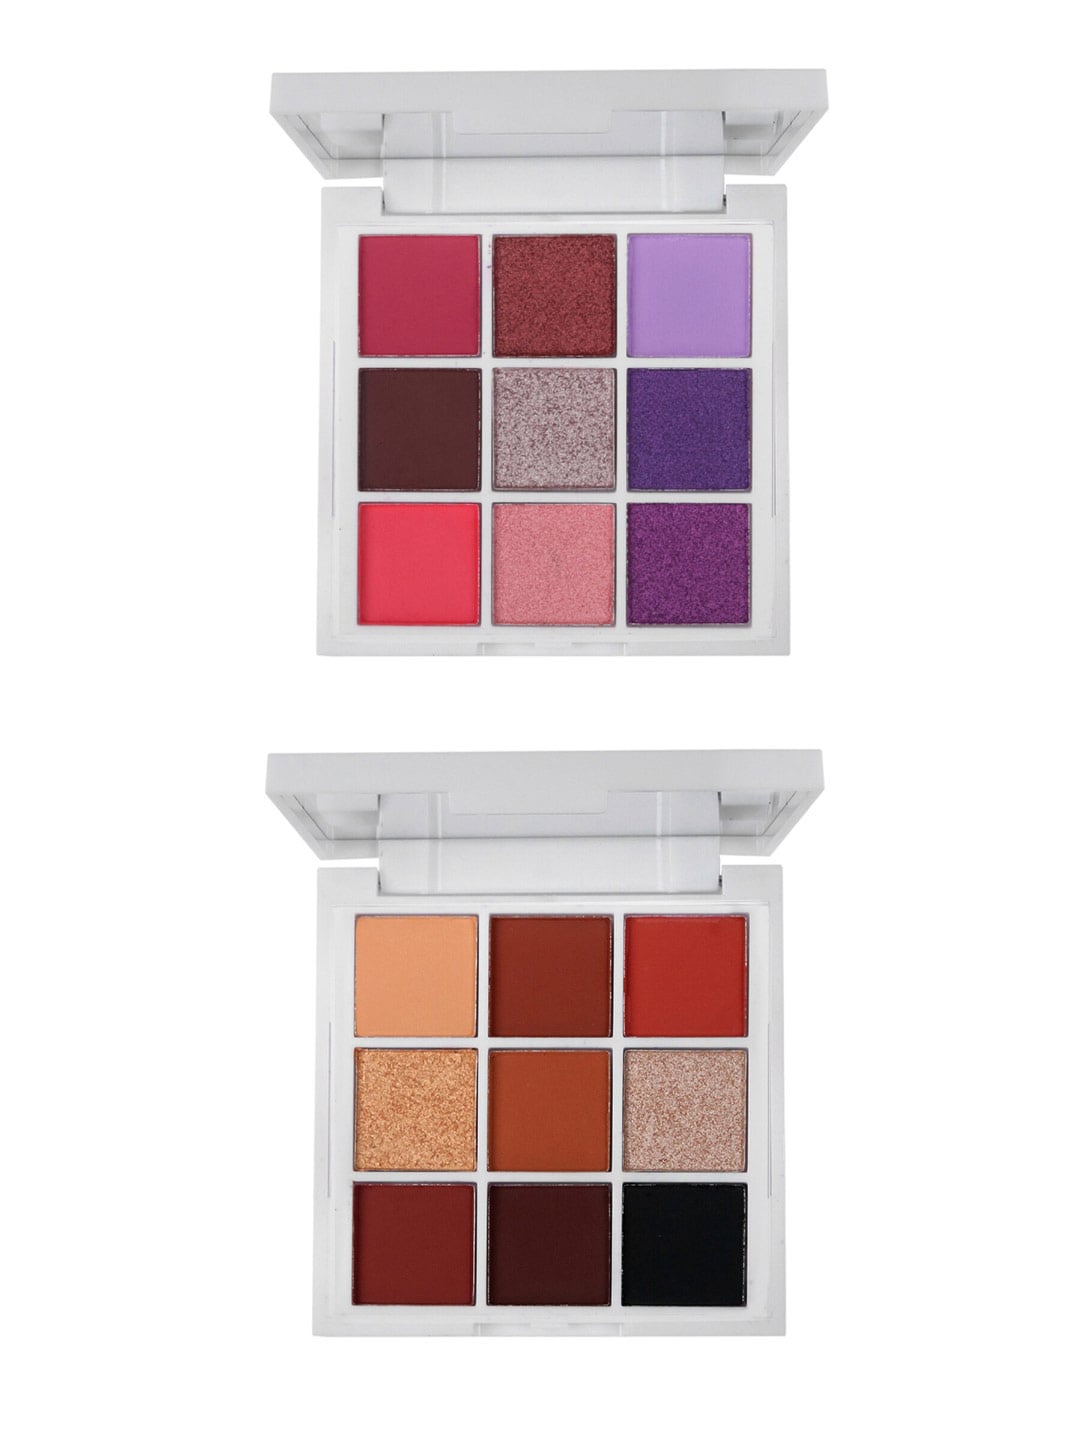 MARS Set of 2 I Belong In Your Purse Eyeshadow Palette - Smoke It Up & Lit It Up Price in India